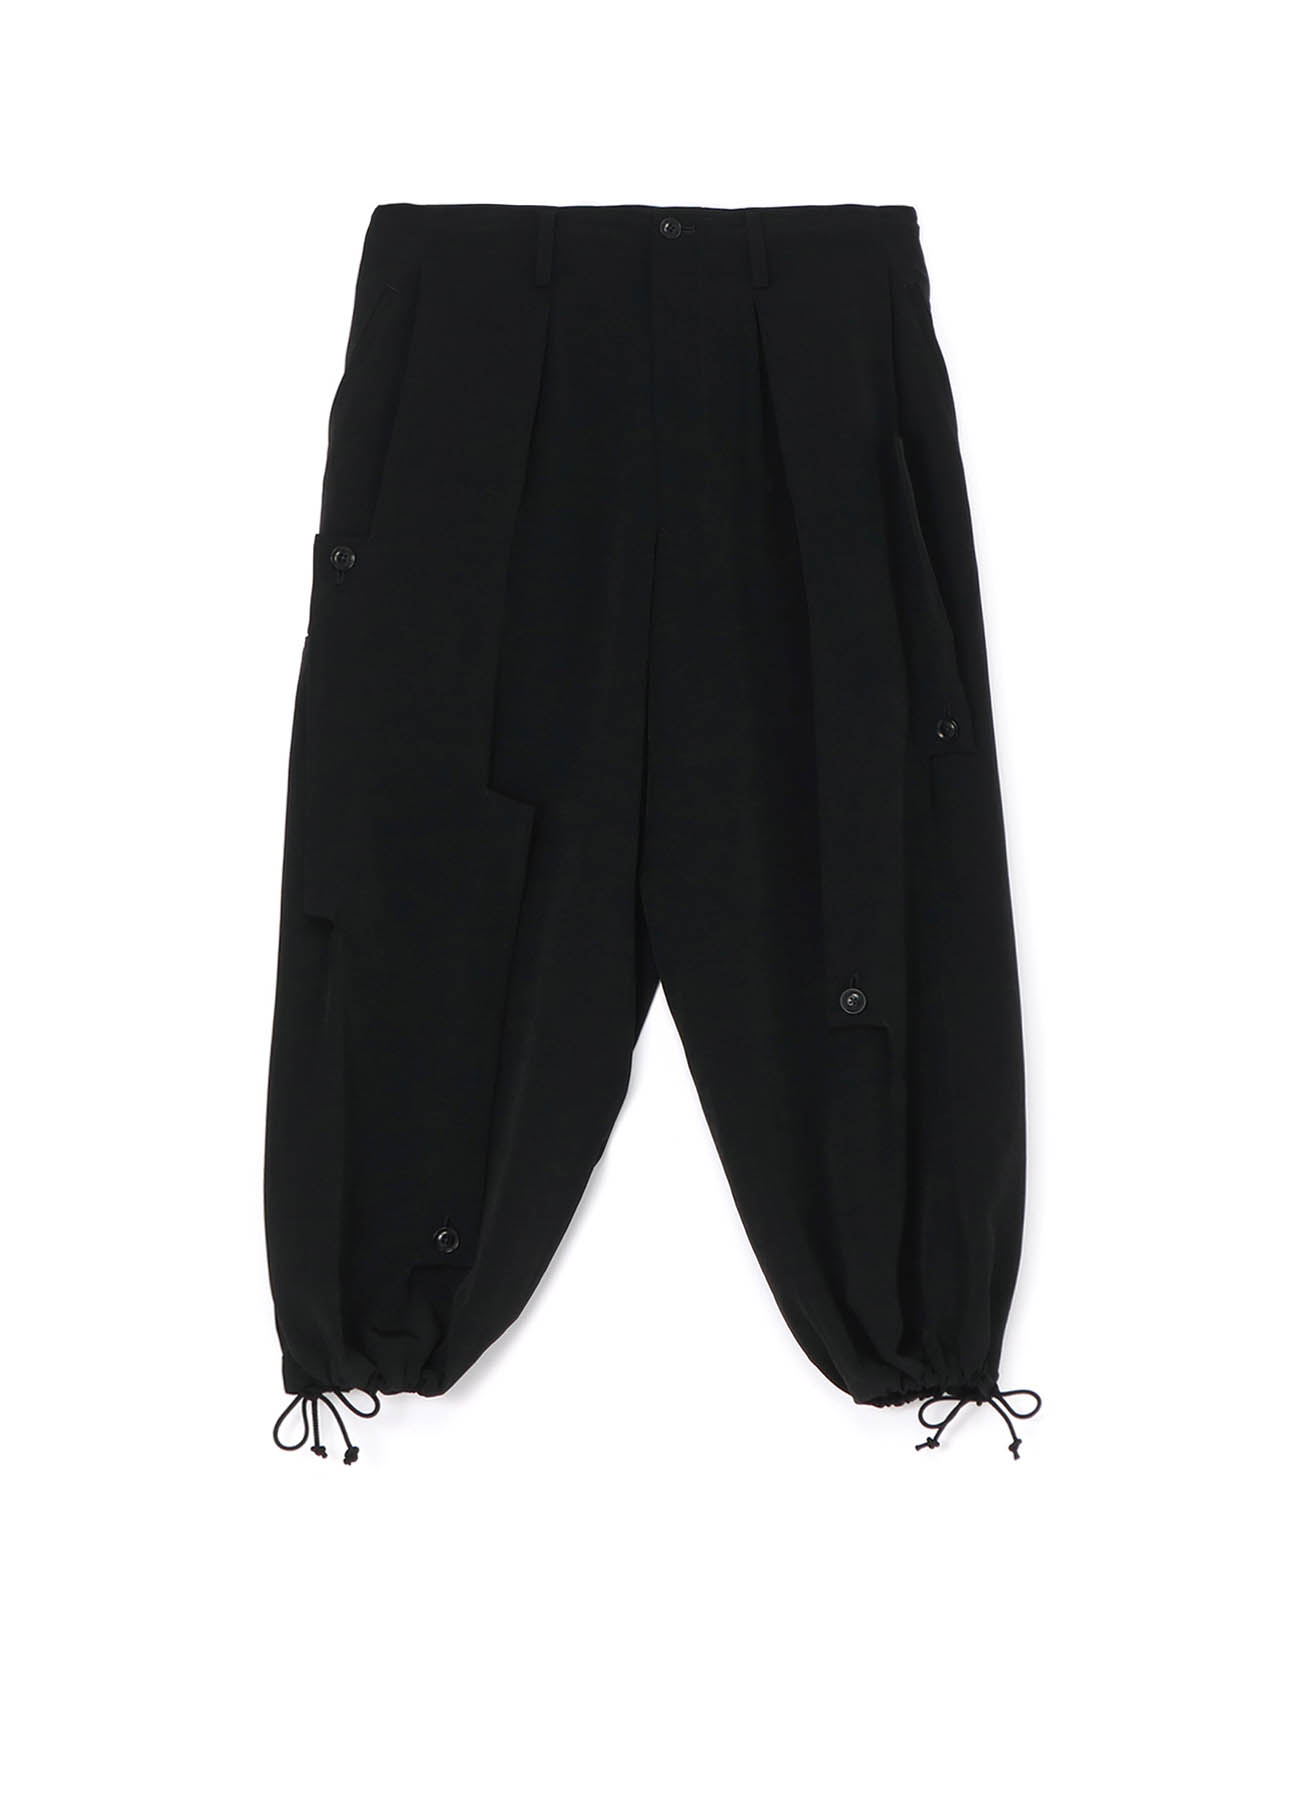 TRIACETATE POLYESTER CREPE de CHINE FLAPPY PANTS